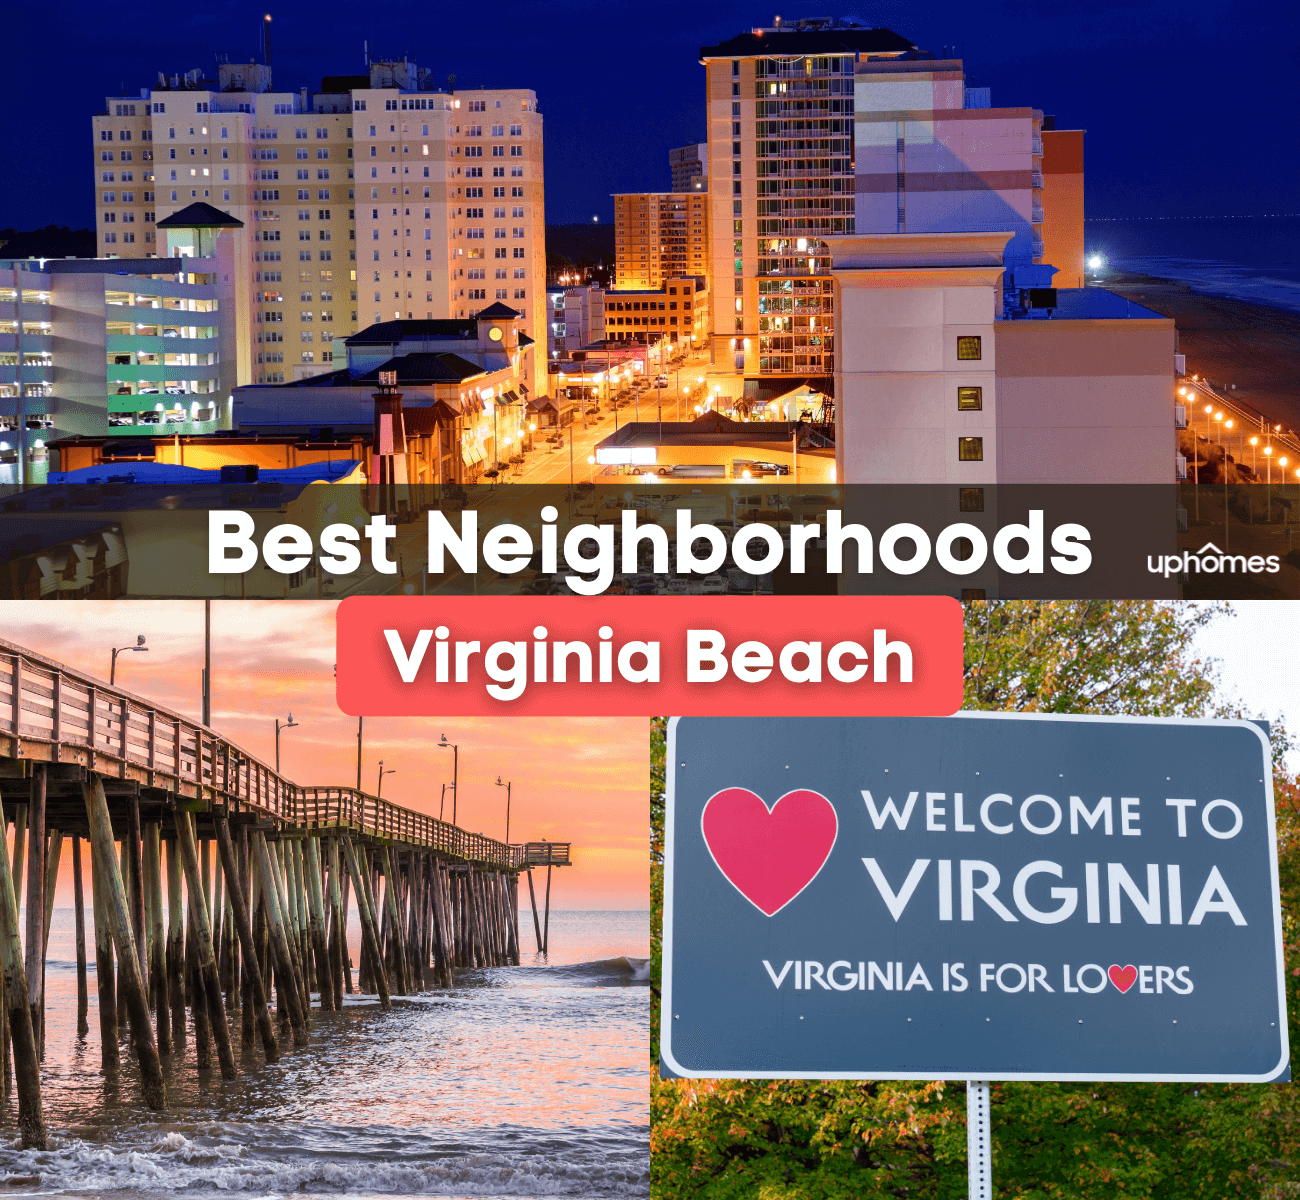 Best Neighborhoods in Virginia Beach, VA - Where are the best places to live in Virginia Beach?